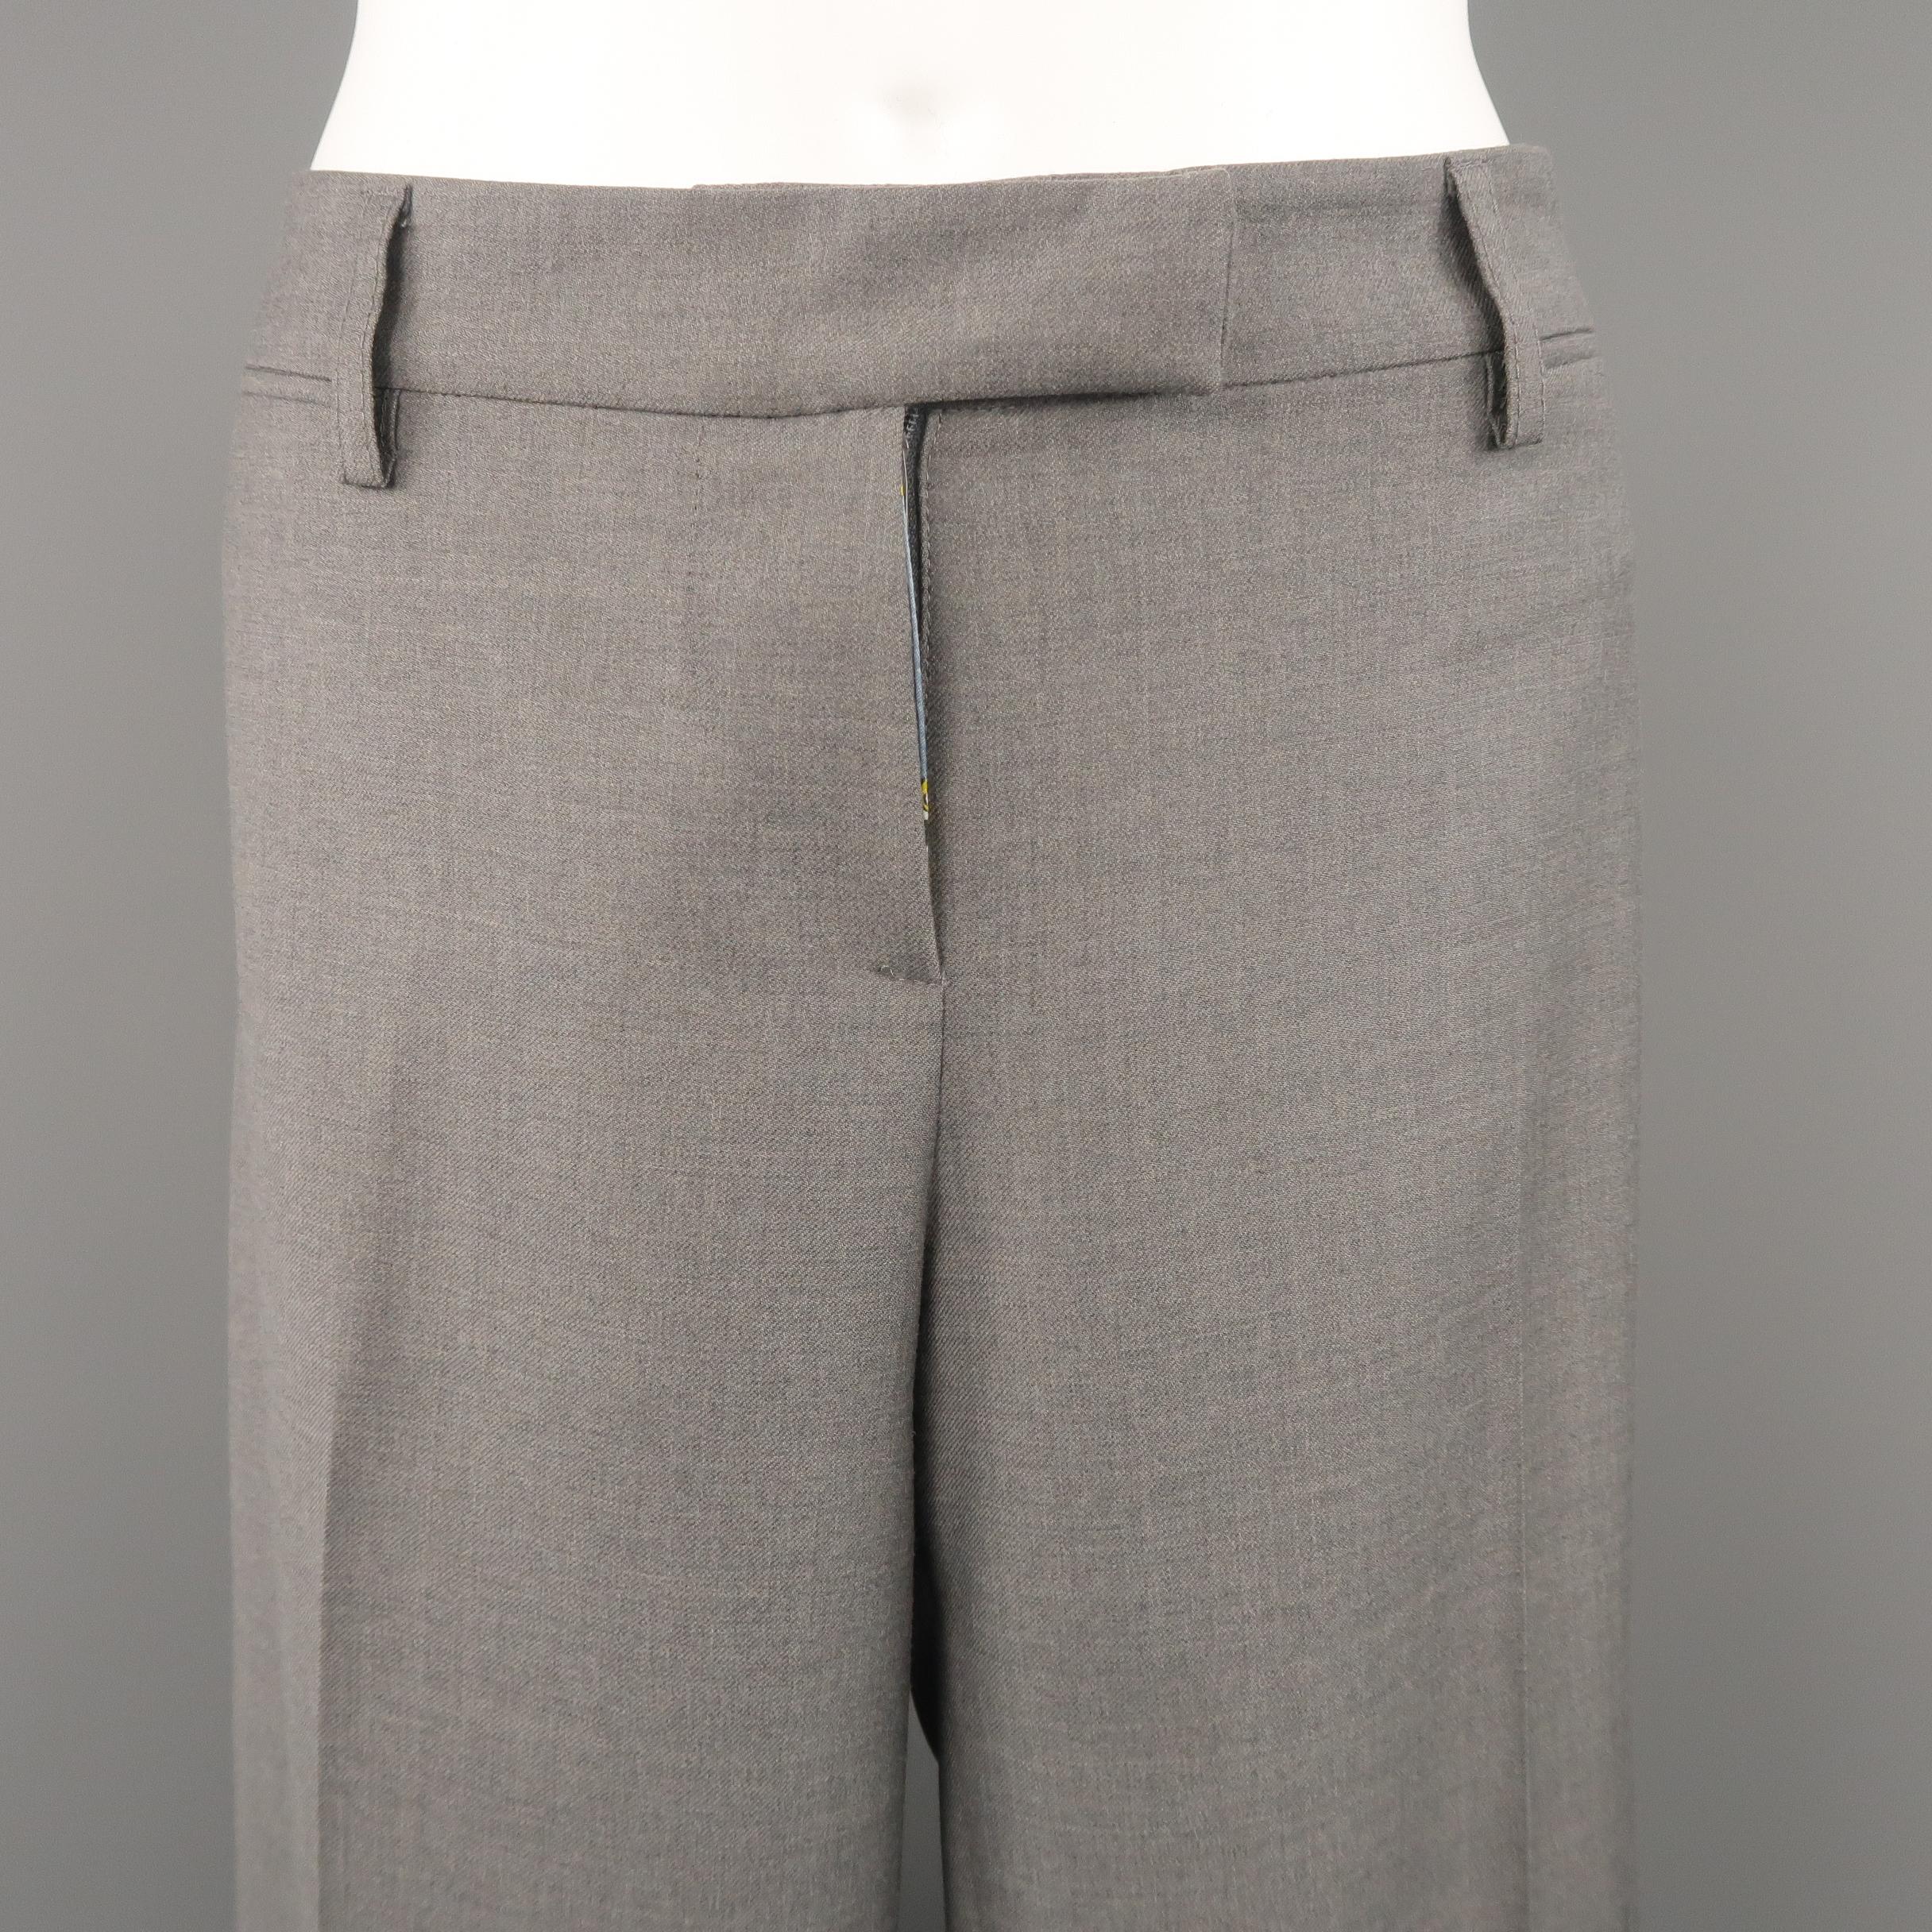 EMILIO PUCCI dress pants come in heather gray virgin wool with a wide, flat front,  straight leg. Printed liner. Made in Italy.
 
Excellent Pre-Owned Condition.
Marked: US 12
 
Measurements:
 
Waist: 33.5 in.
Rise: 9 in.
Inseam:  33 in.